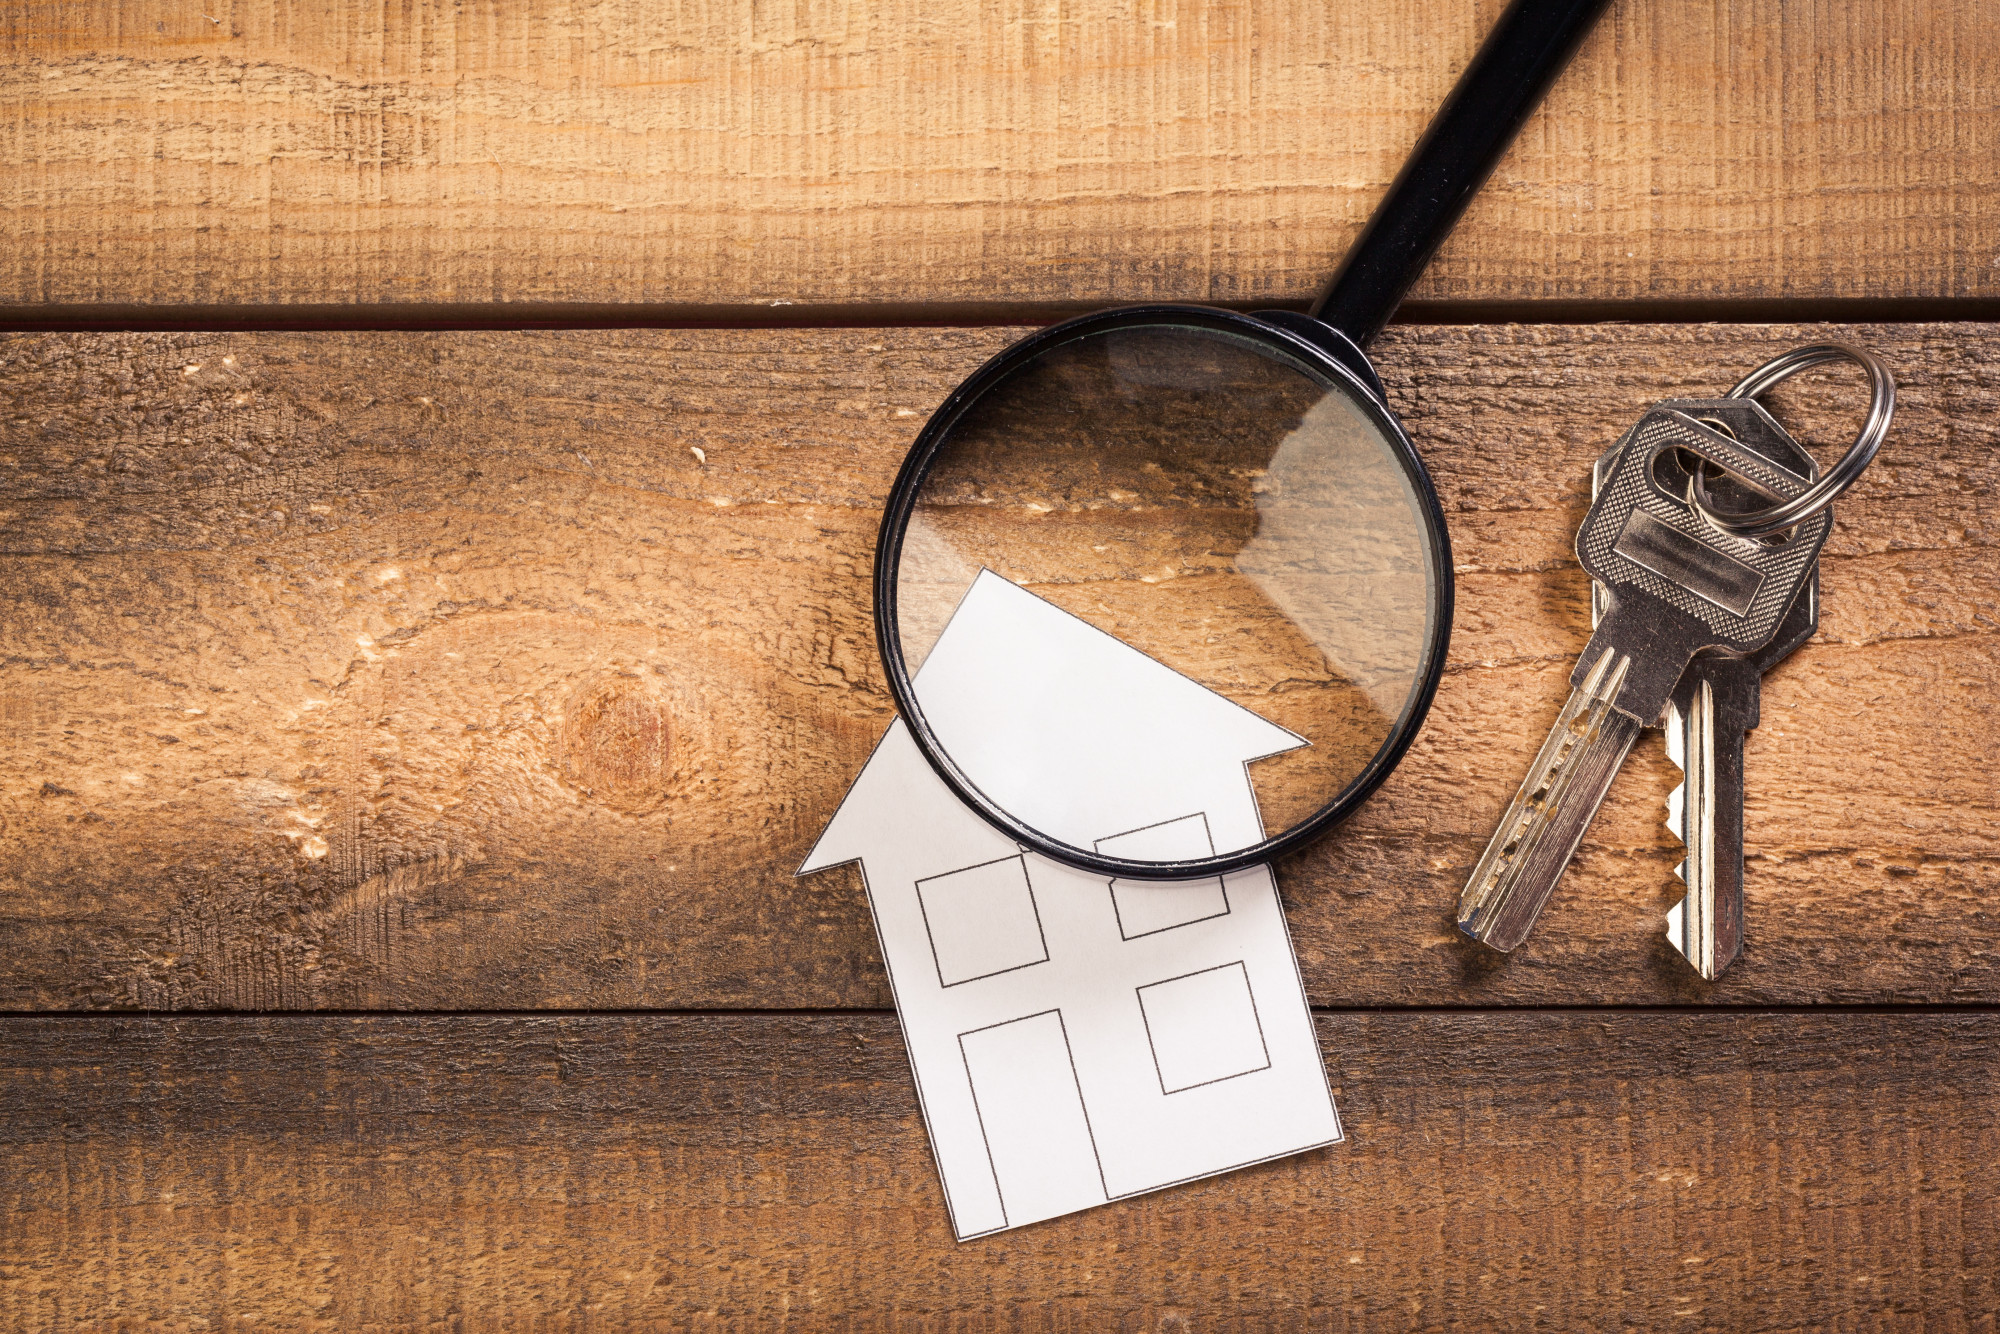 It is important to know what to look for during the house hunting process. This is what you need to consider when searching for a new home.